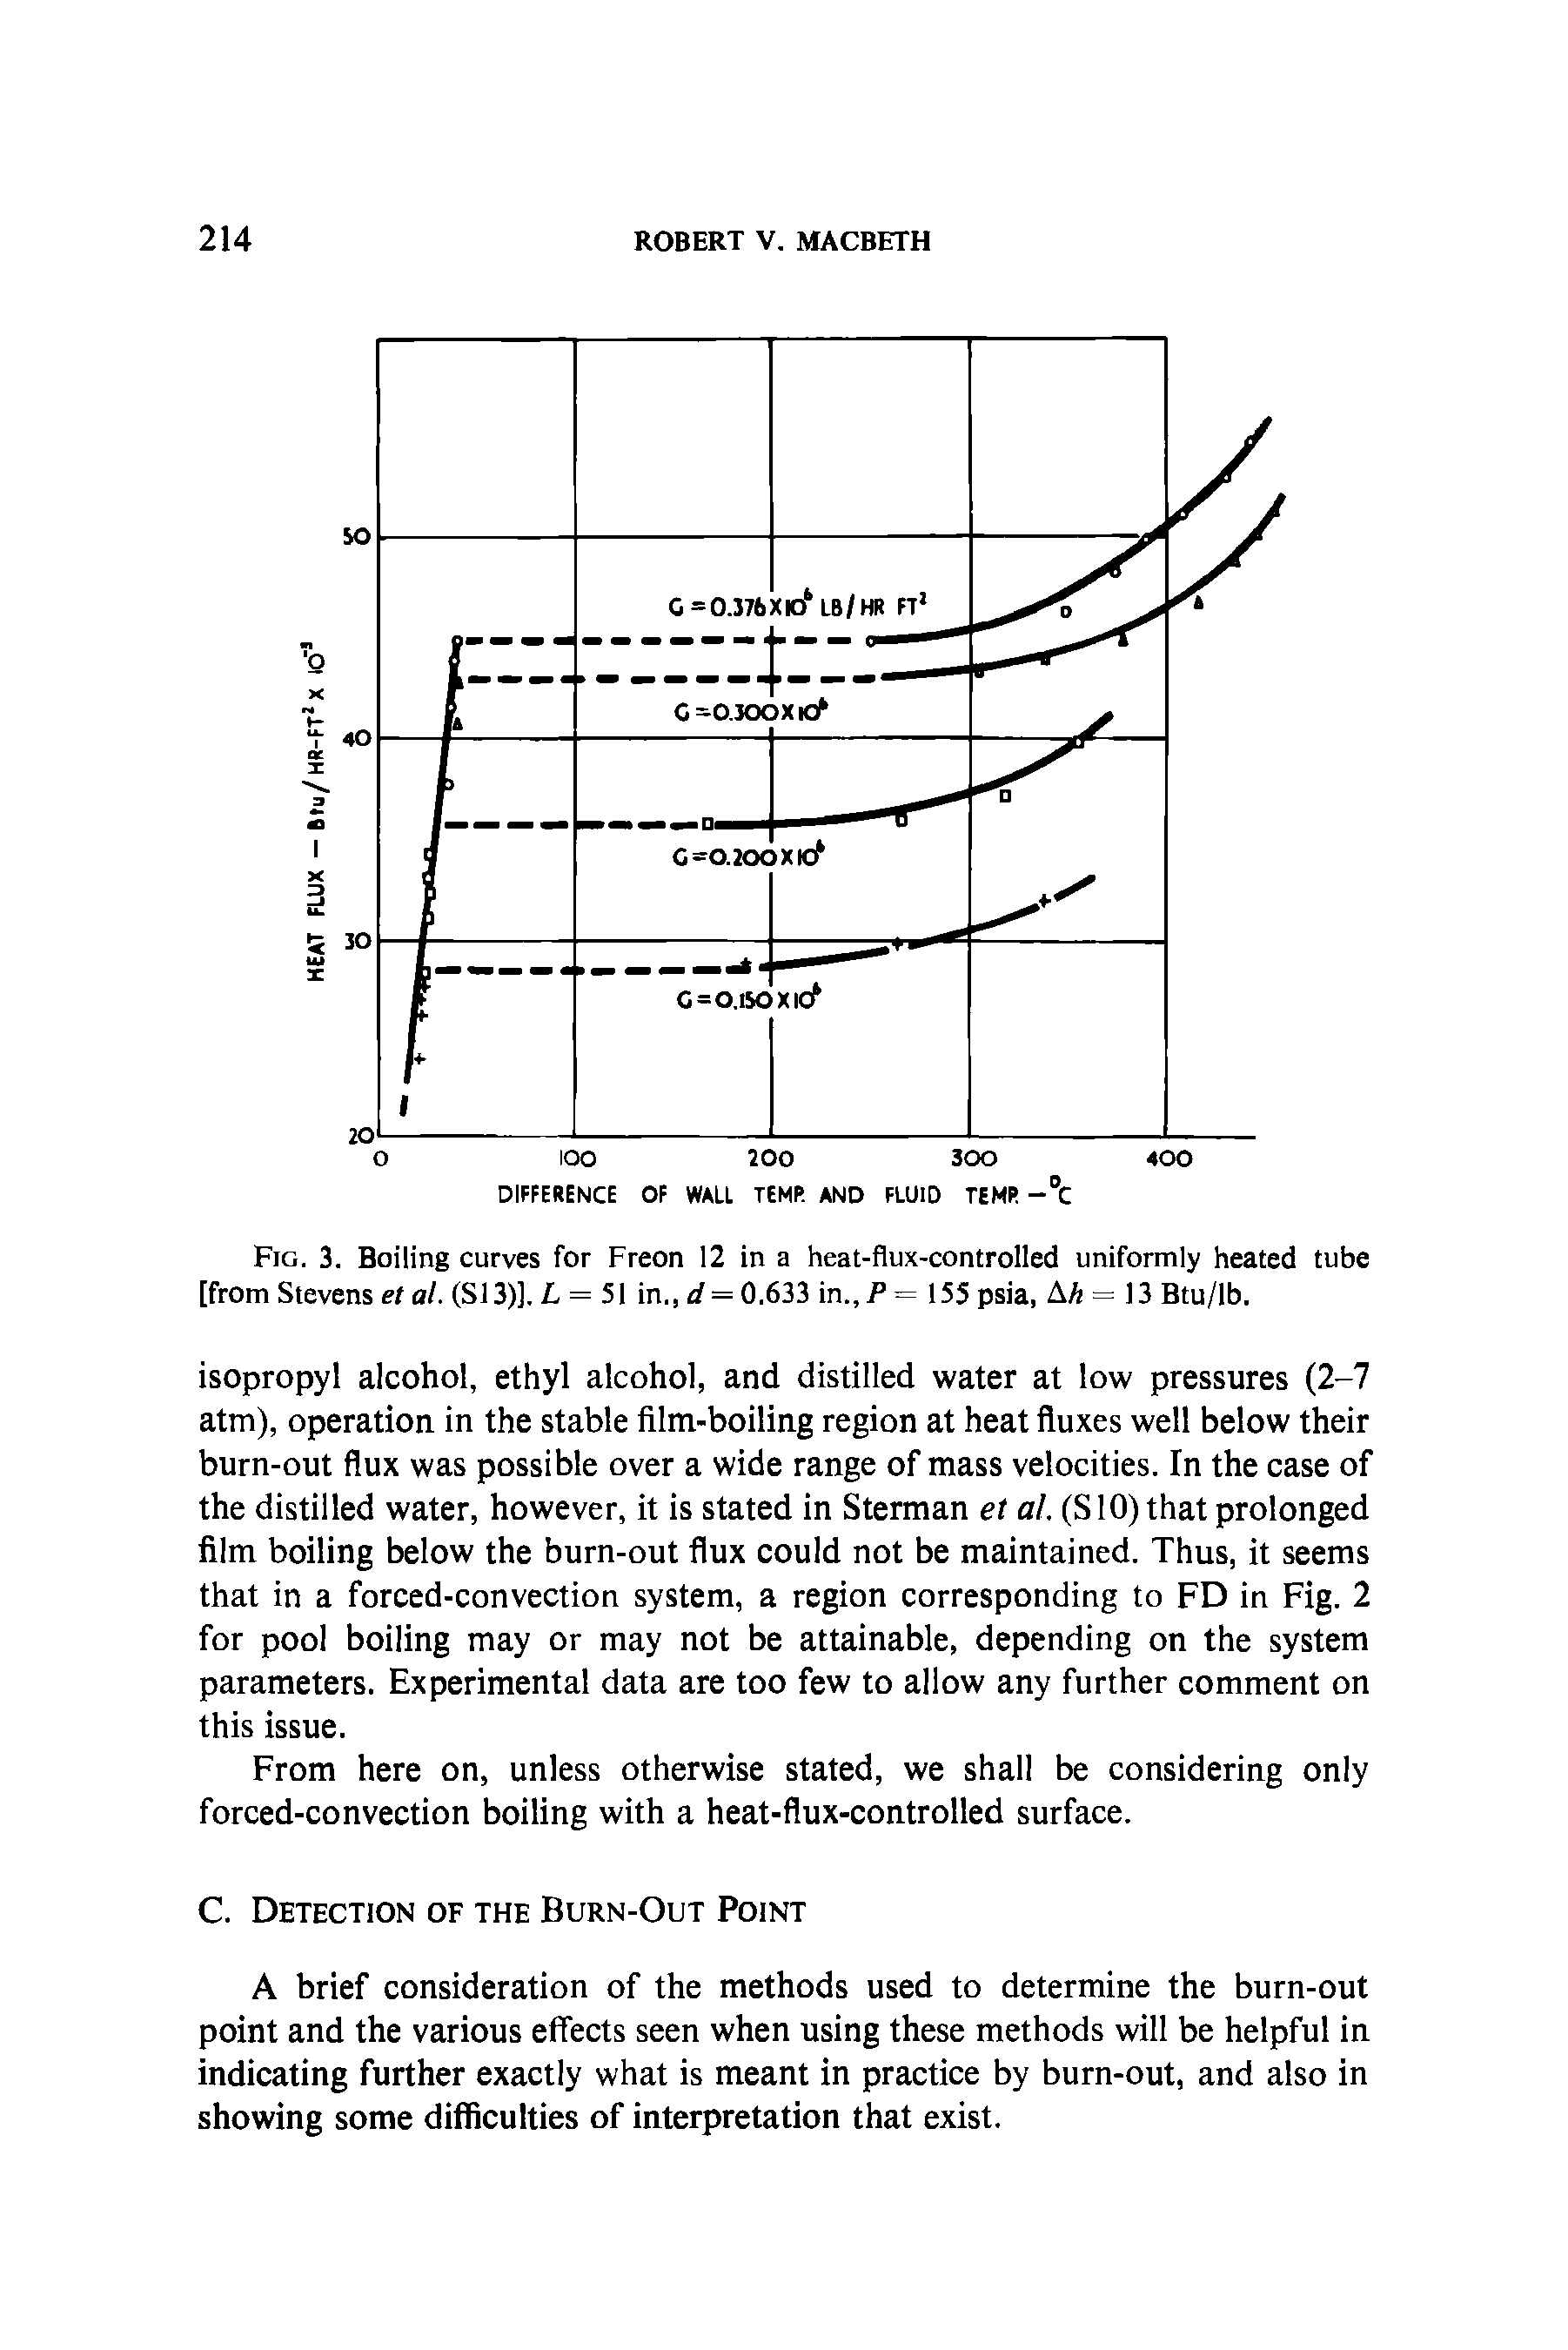 Fig. 3. Boiling curves for Freon 12 in a heat-flux-controlled uniformly heated tube [from Stevens et al. (SI 3)]. L = 51 in., 4 = 0.633 in.,F = 155 psia, Ah = 13 Btu/lb.